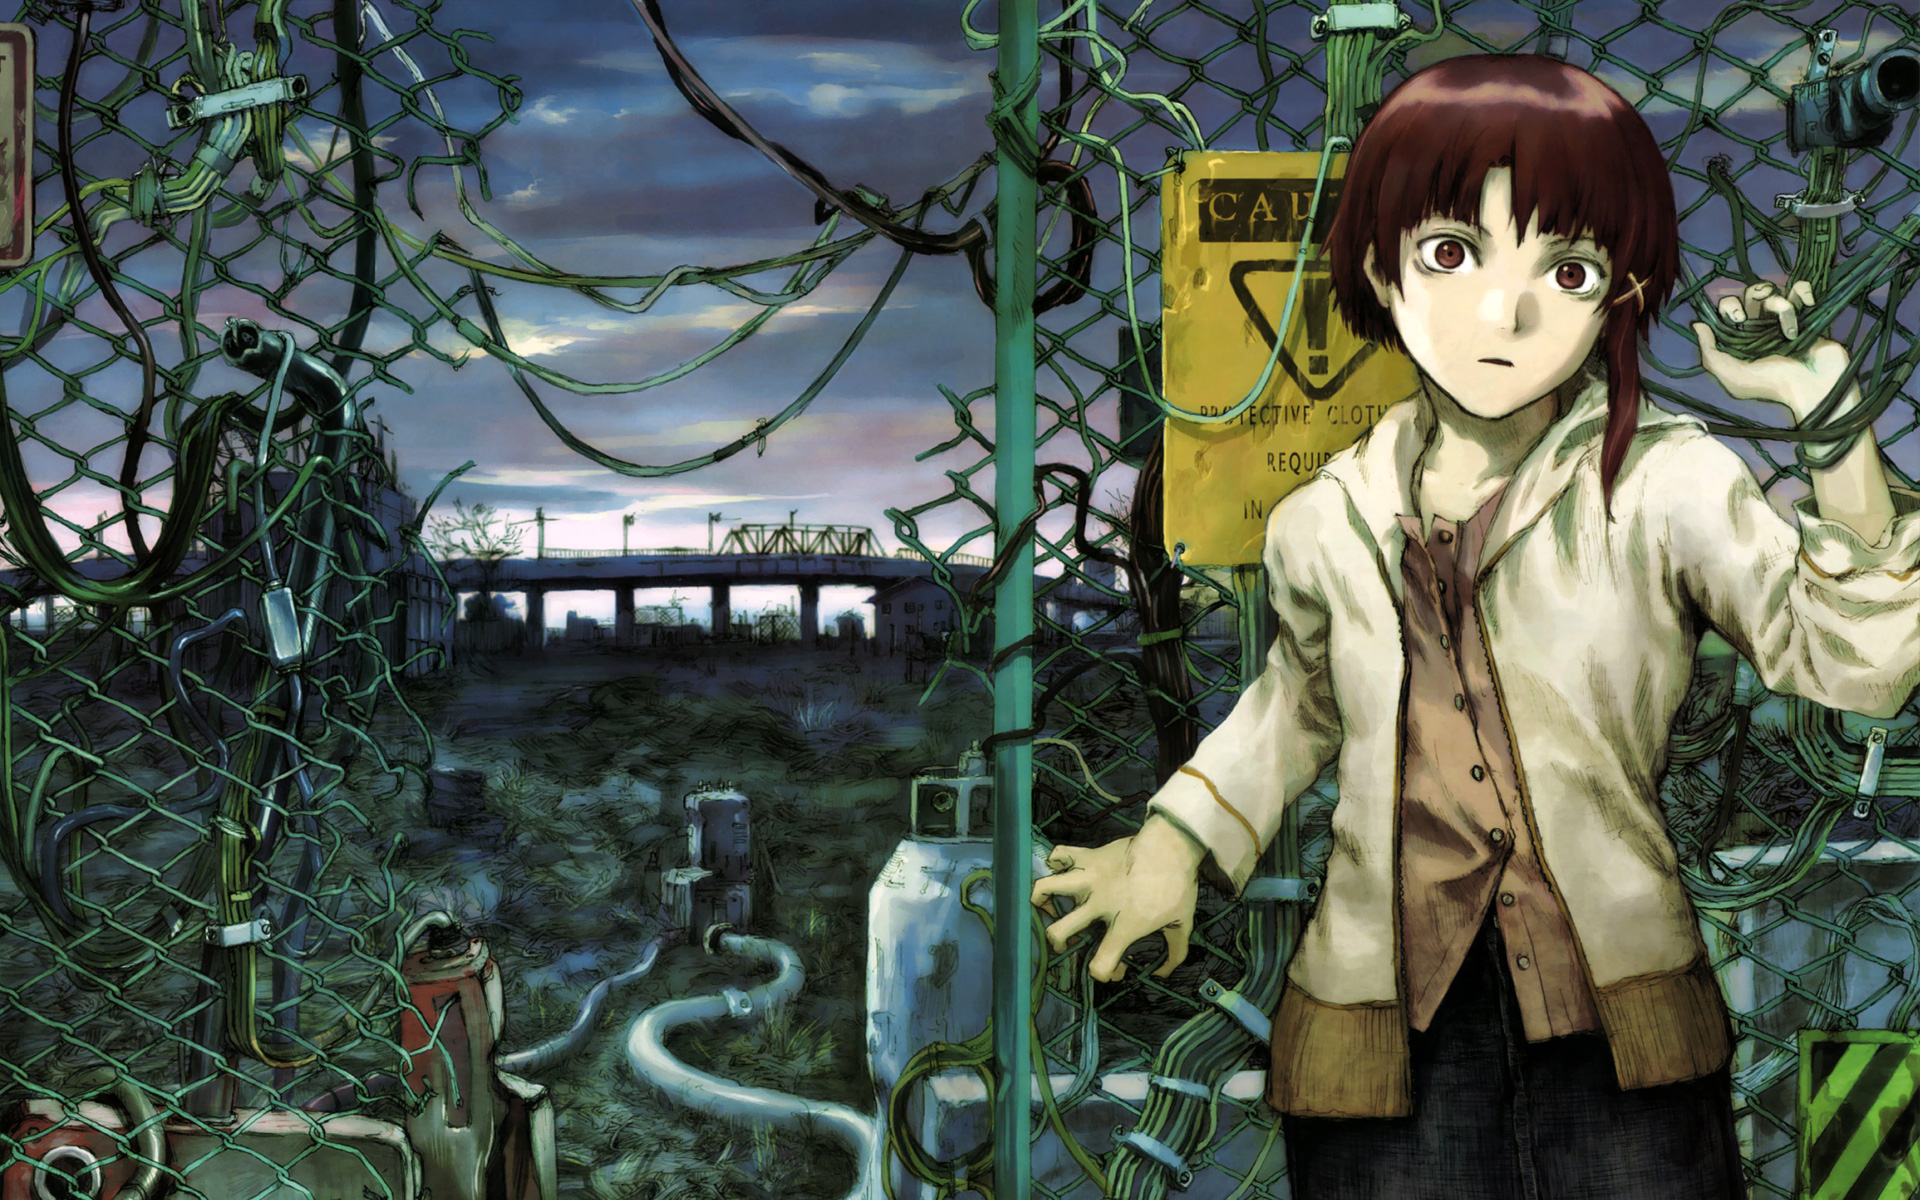 Free Download Lain Chain Link Fence Wallpaper 19x10 Full Hd Wallpapers 19x10 For Your Desktop Mobile Tablet Explore 75 Lain Wallpaper Serial Experiments Lain Wallpaper